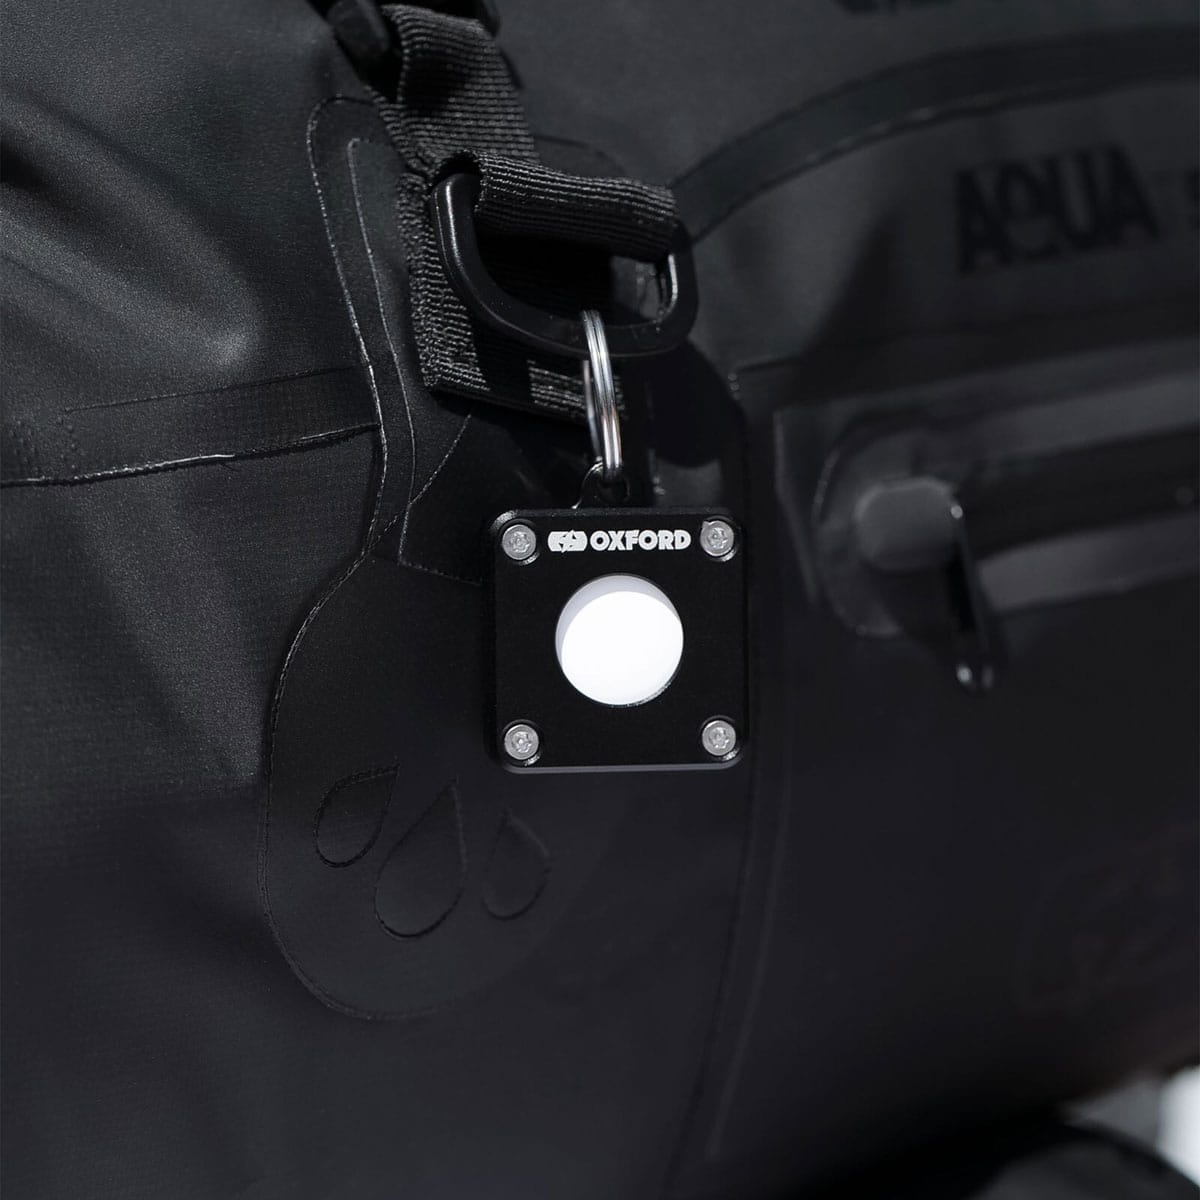 Oxford Universal Tag Mount AirTag Holder: Securely attach a tracker to your valuables